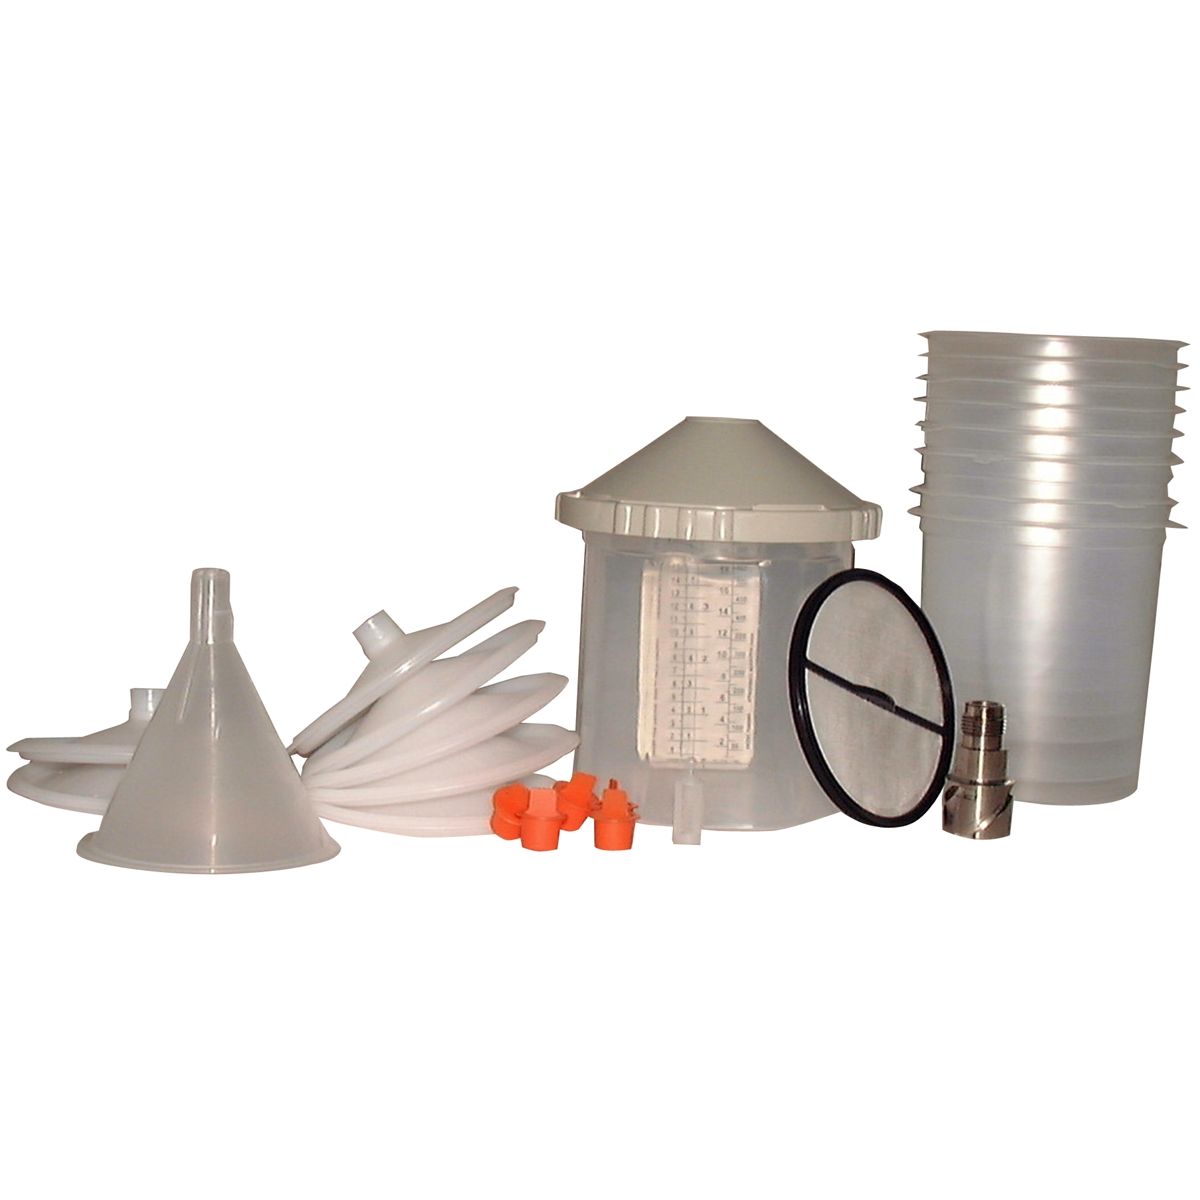 DPC-654 Disposable Cup and Demo Kit